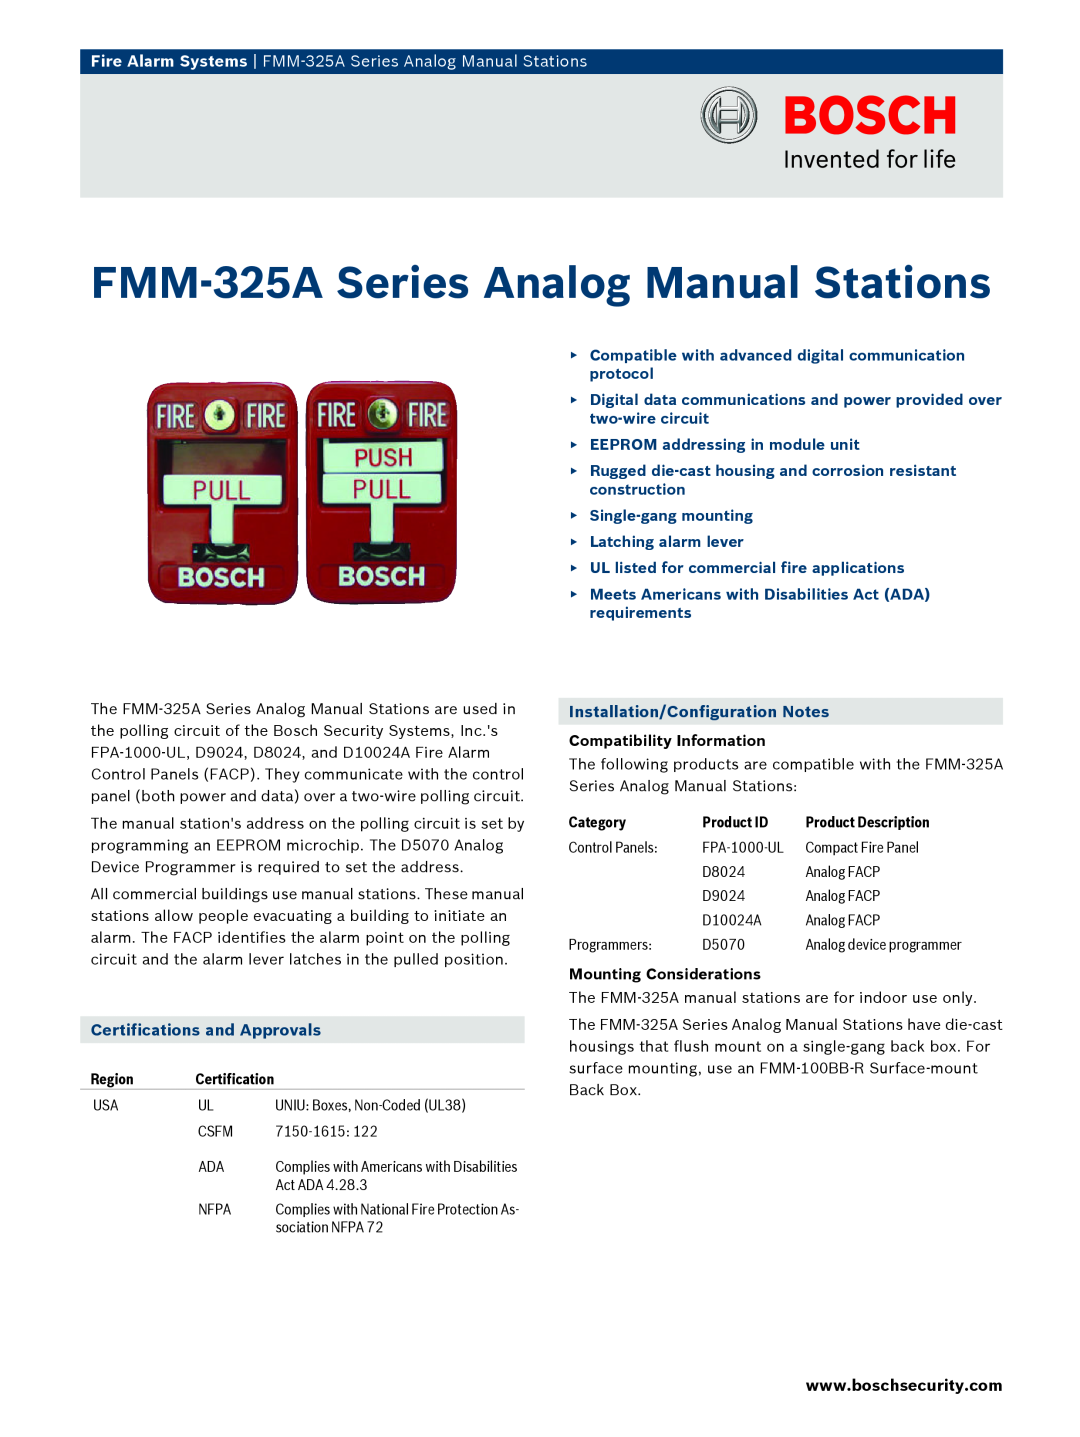 Bosch Appliances FMM325A manual Fire Alarm Systems FMM‑325A Series Analog Manual Stations, Certifications and Approvals 